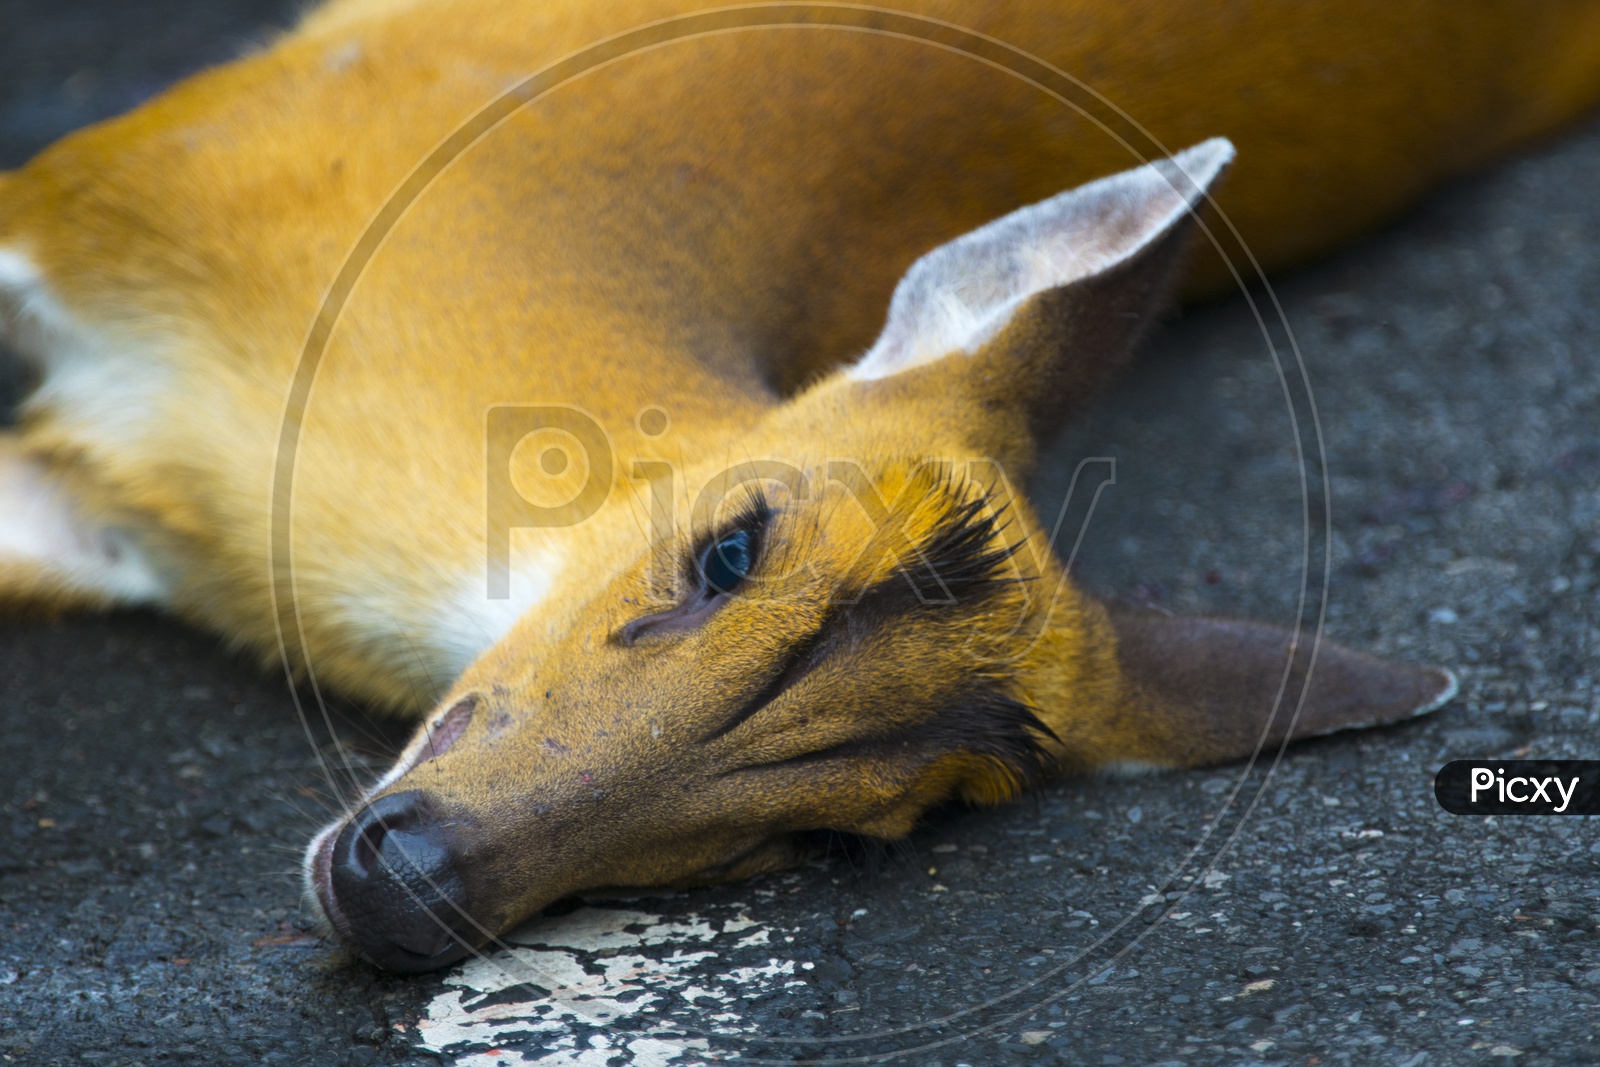 Died Deer in An accident occurred on Barking Deer on the road in Khao Yai National Park